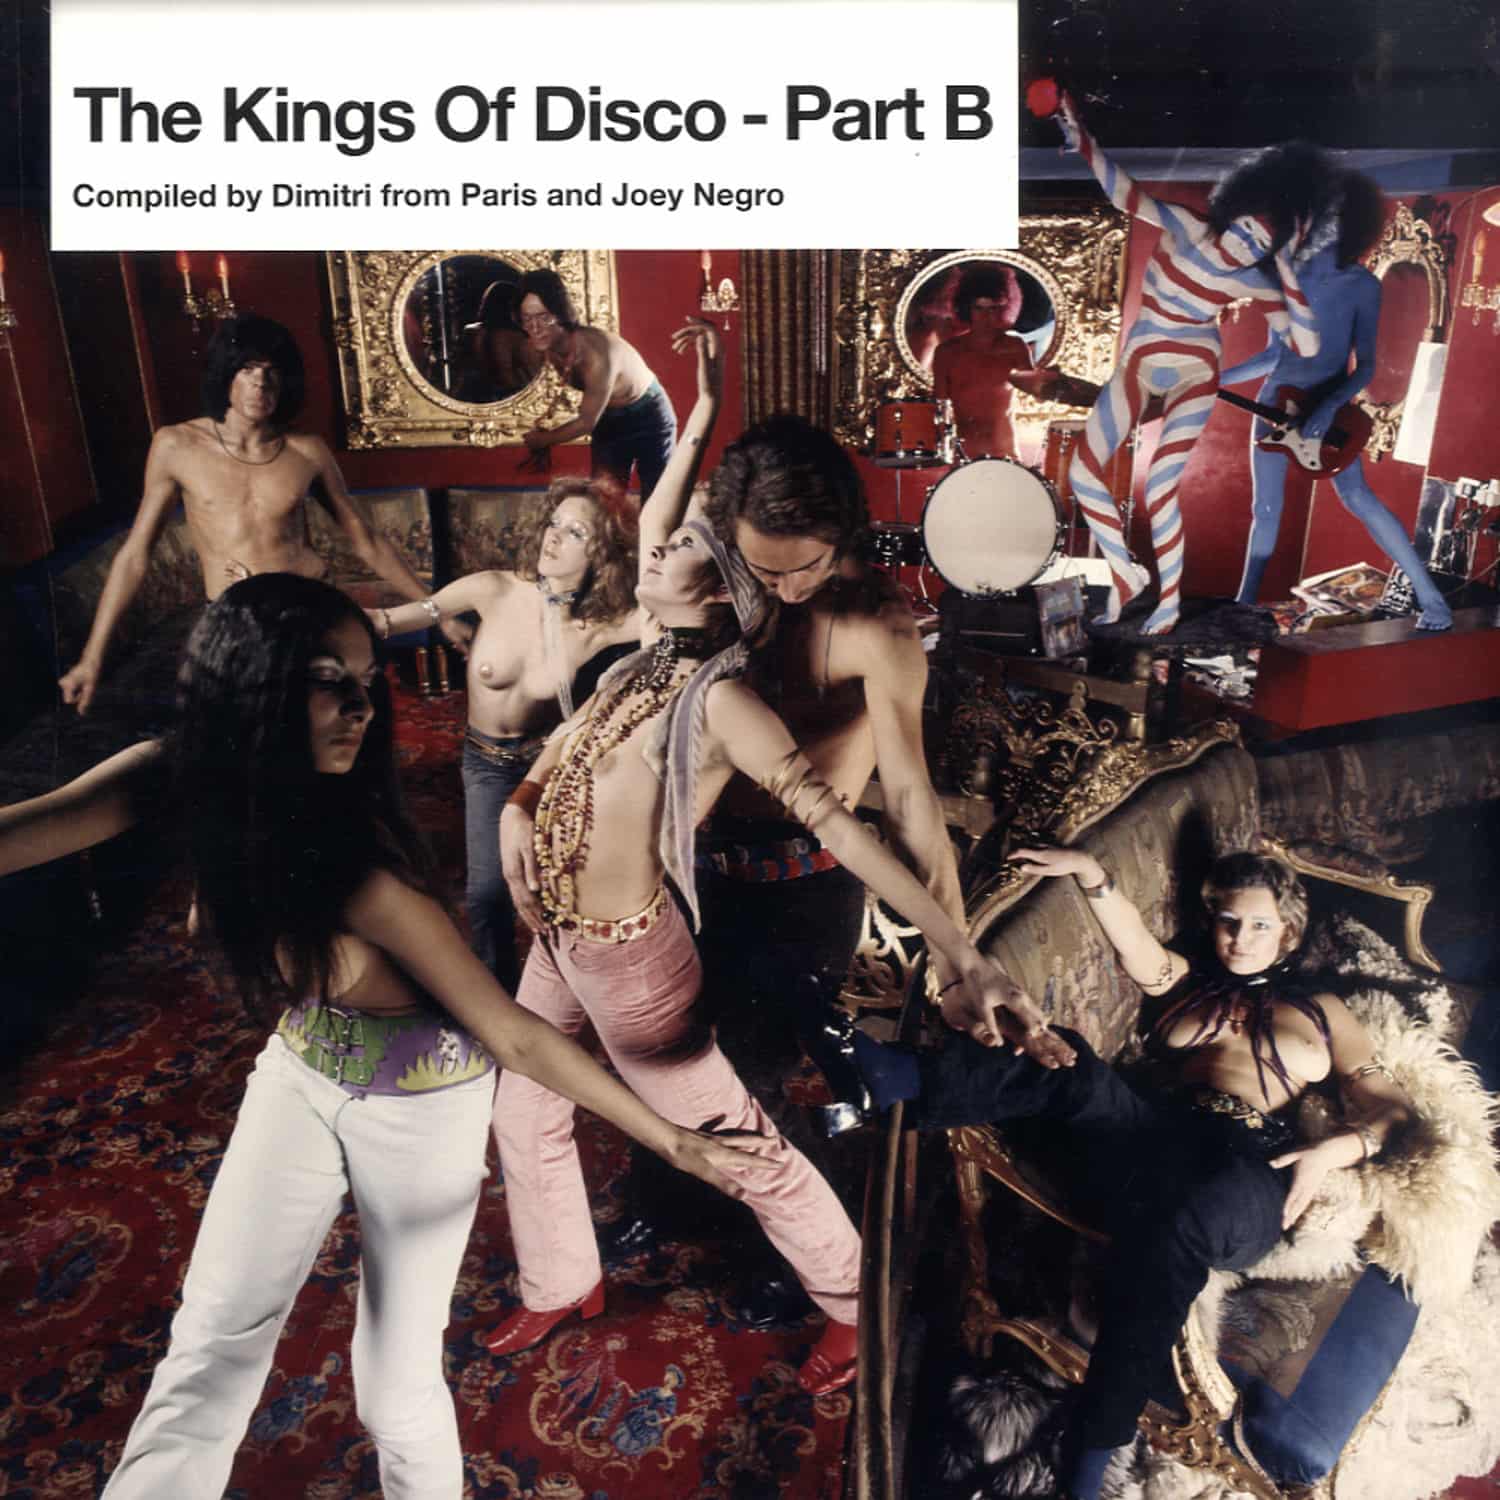 V/A compiled by Dimitri from Paris & Joey Negro - THE KINGS OF DISCO - PART B 